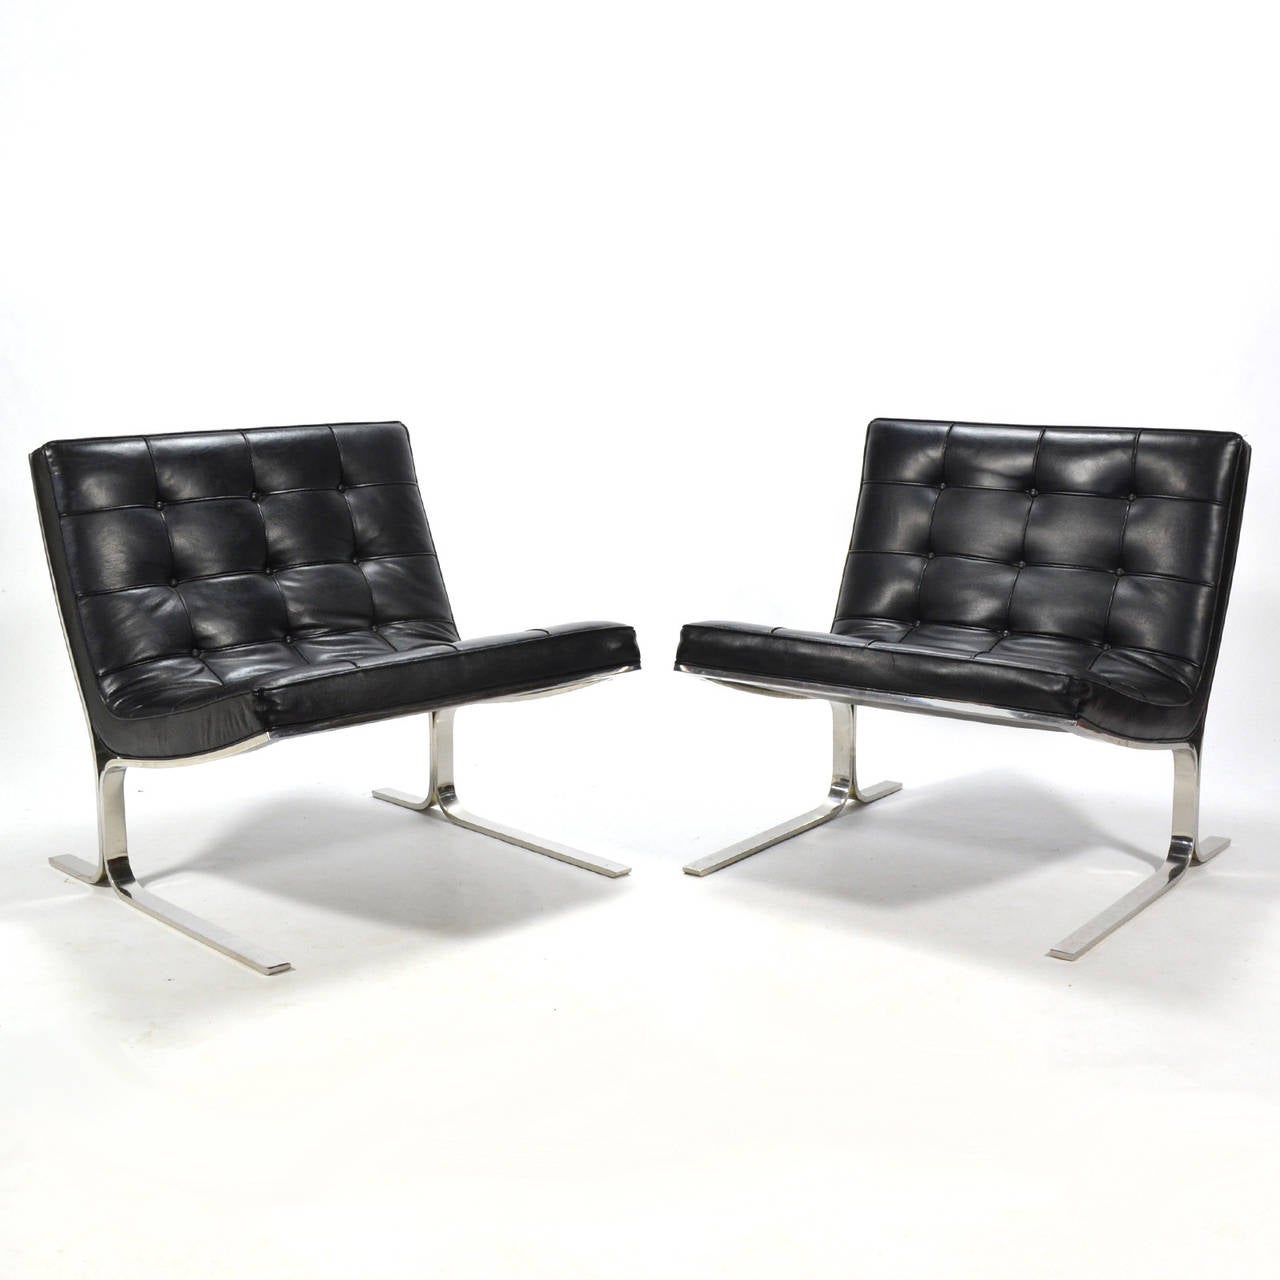 American Nicos Zographos Pair of Lounge Chairs For Sale